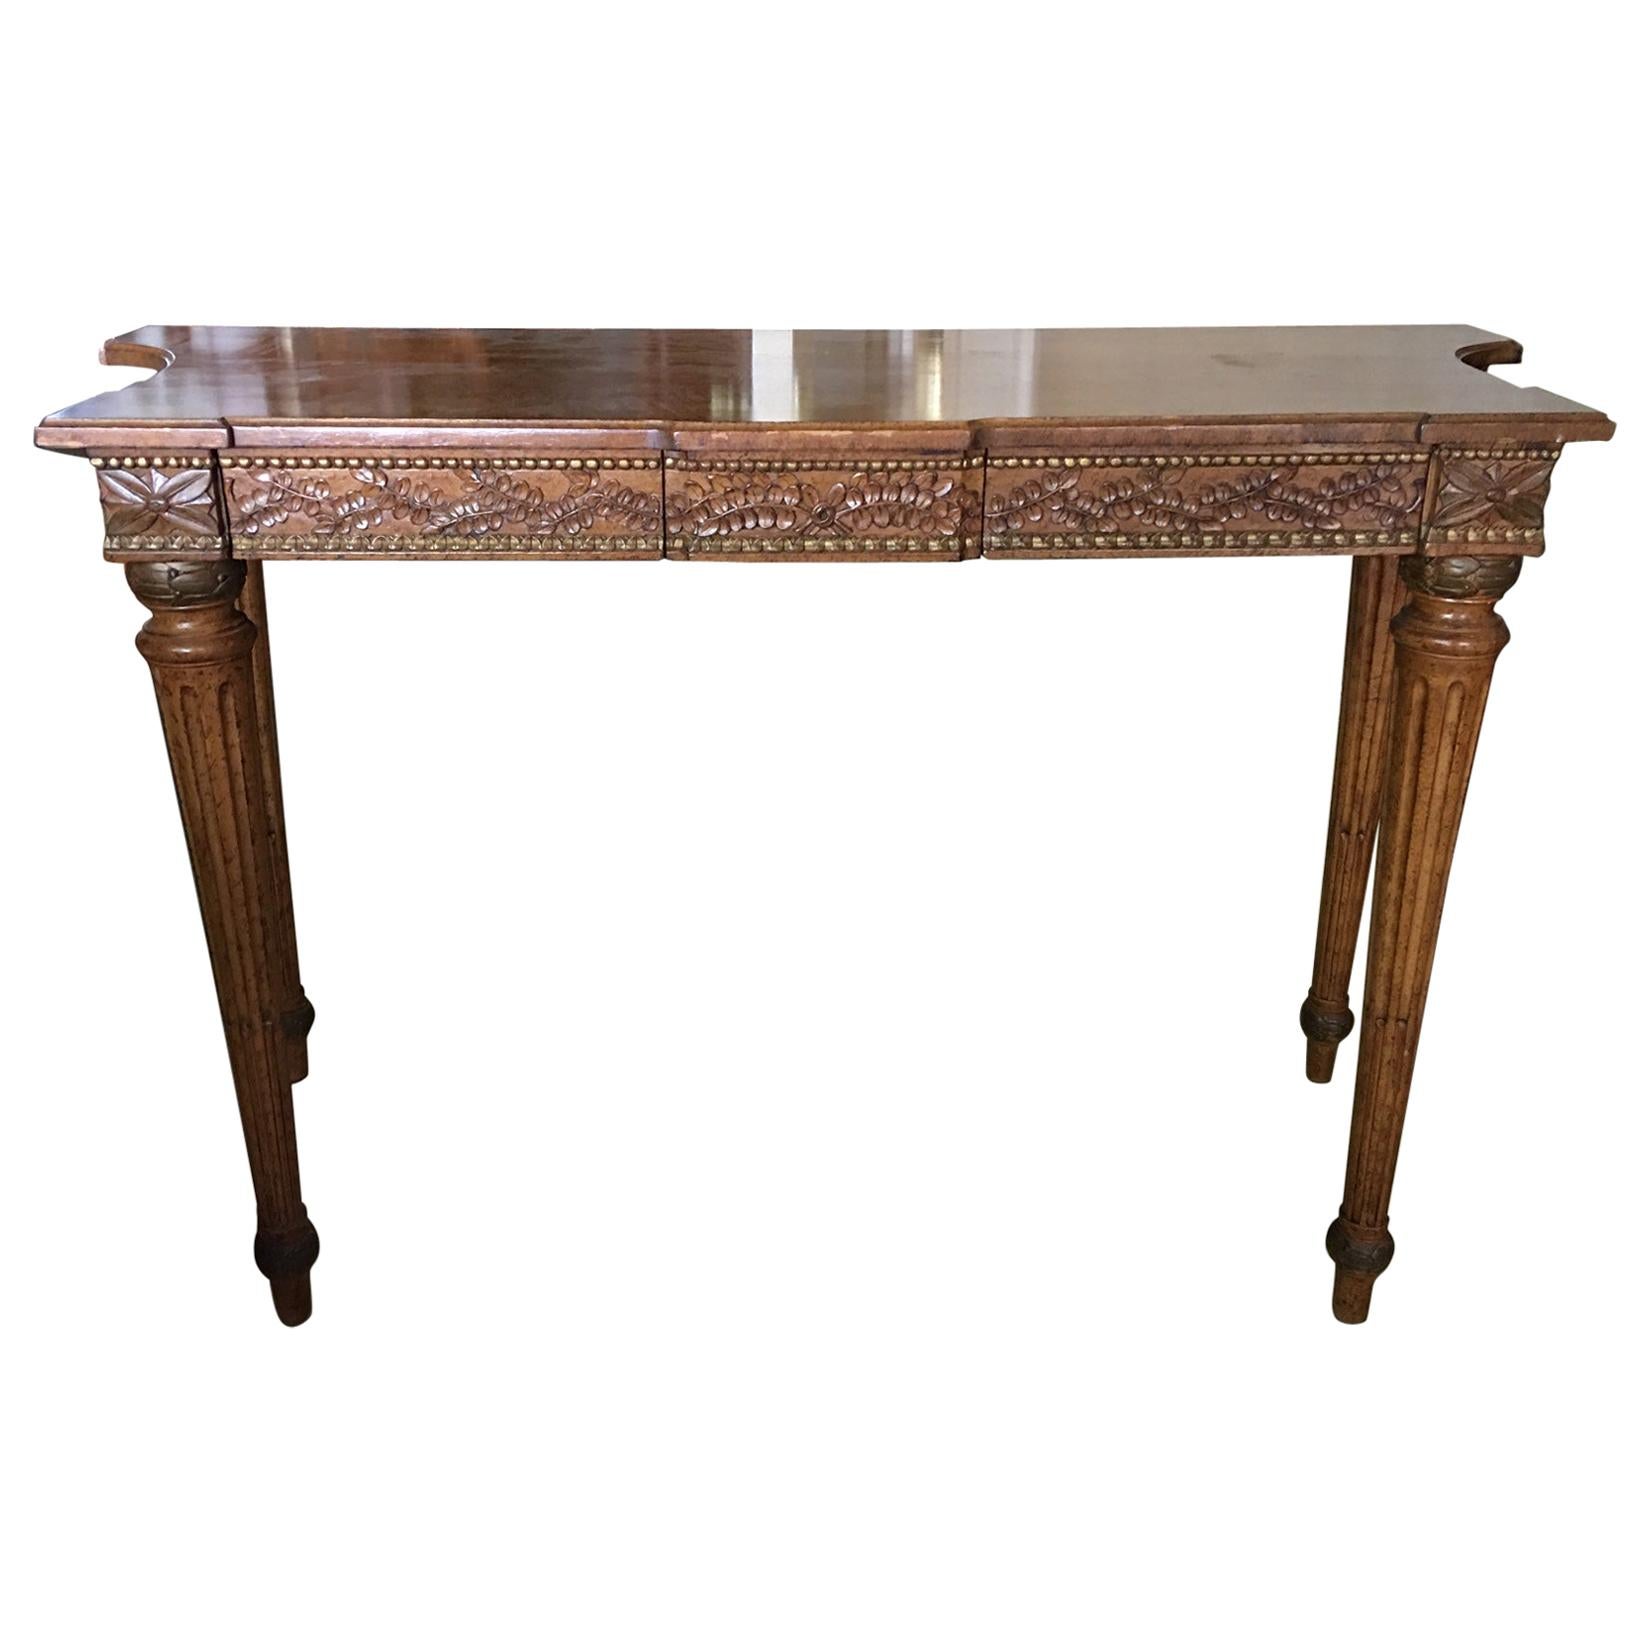 Walnut Console with a Carved Decorative Apron and Two Drawers, 20th Century